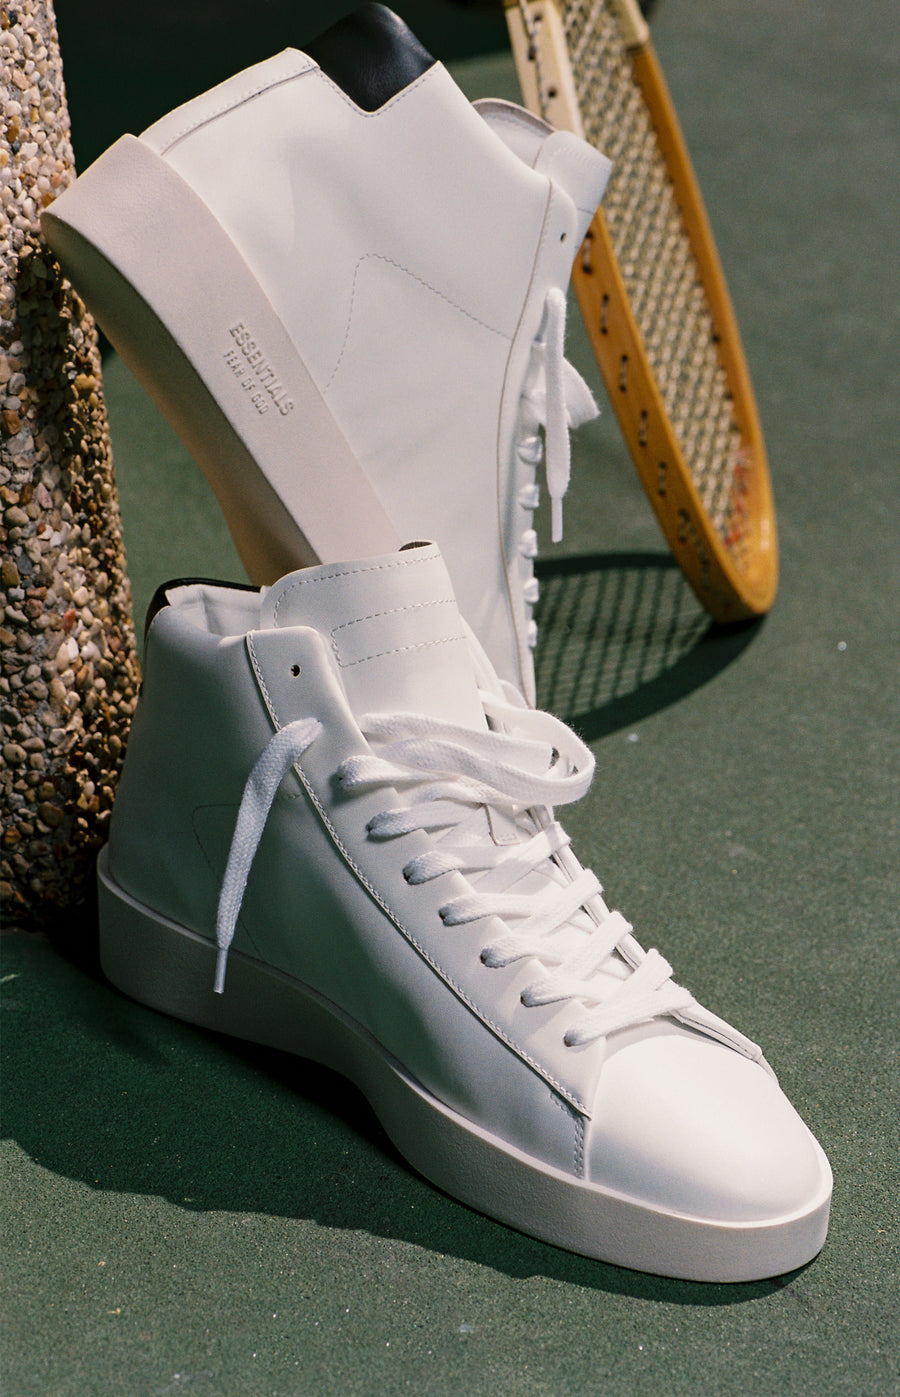 The Essential Tennis Mid - Fear of God